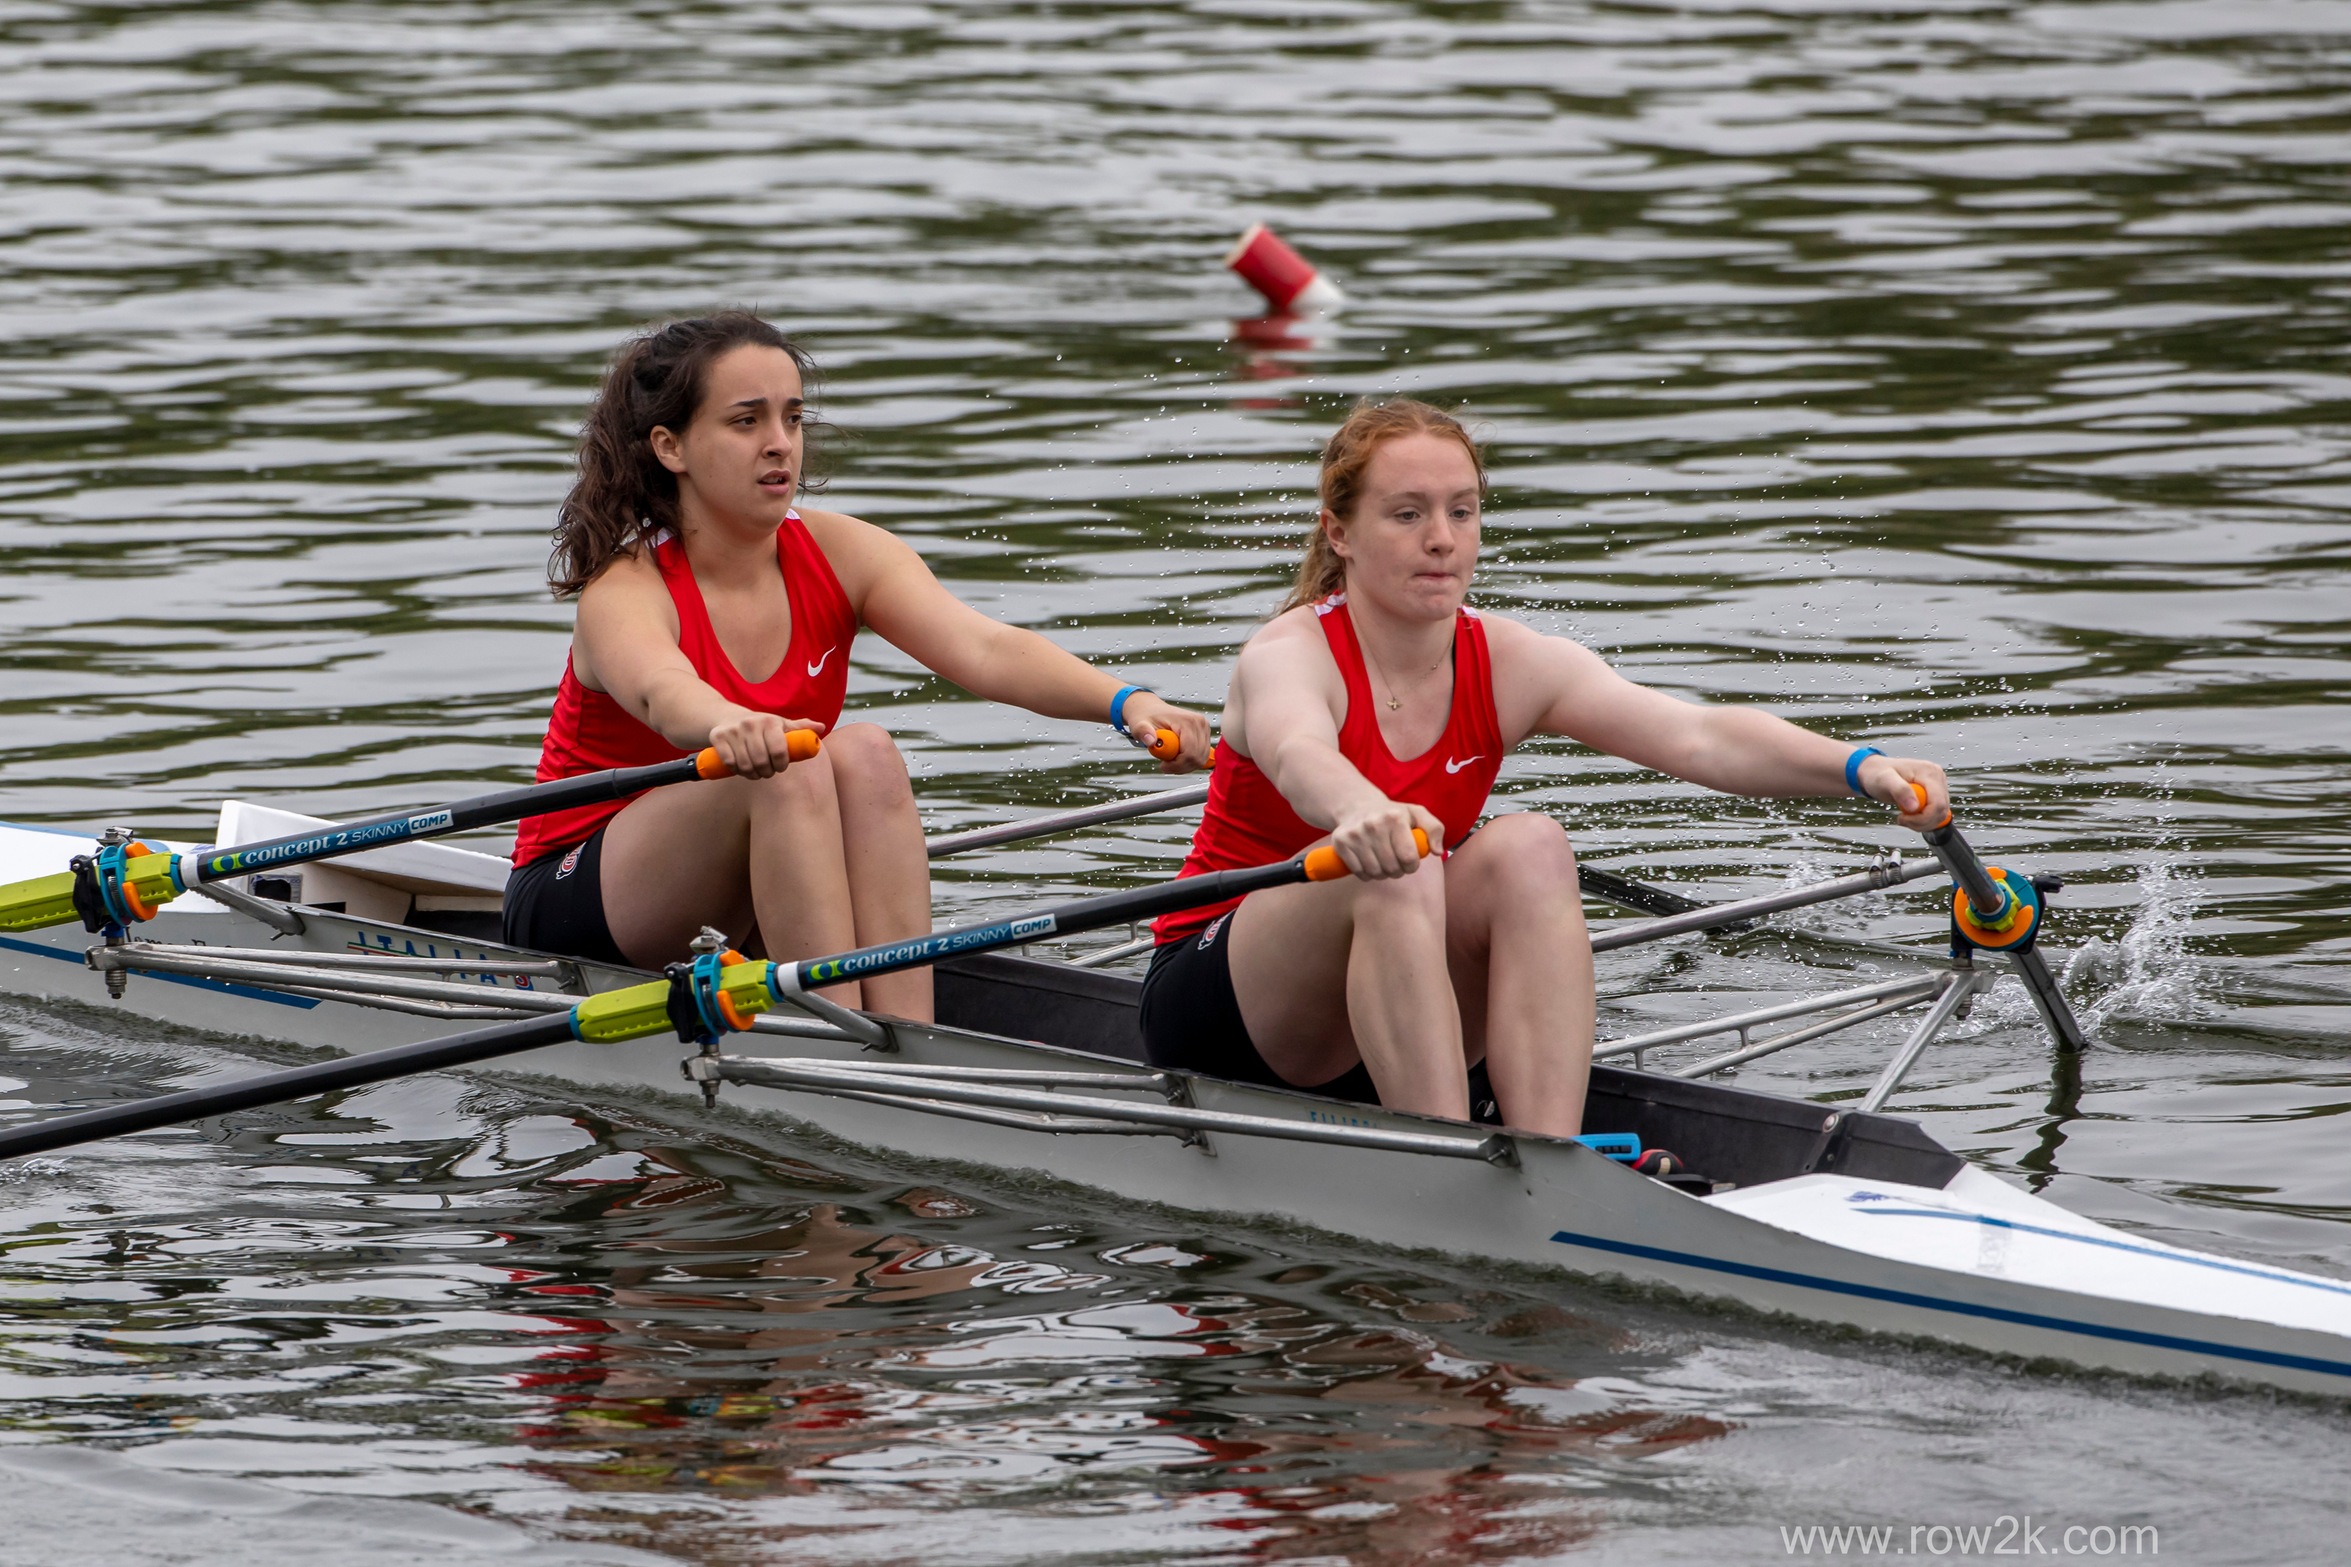 LADY CHARGERS TAKE PART IN HEAD OF THE CHARLES REGATTA